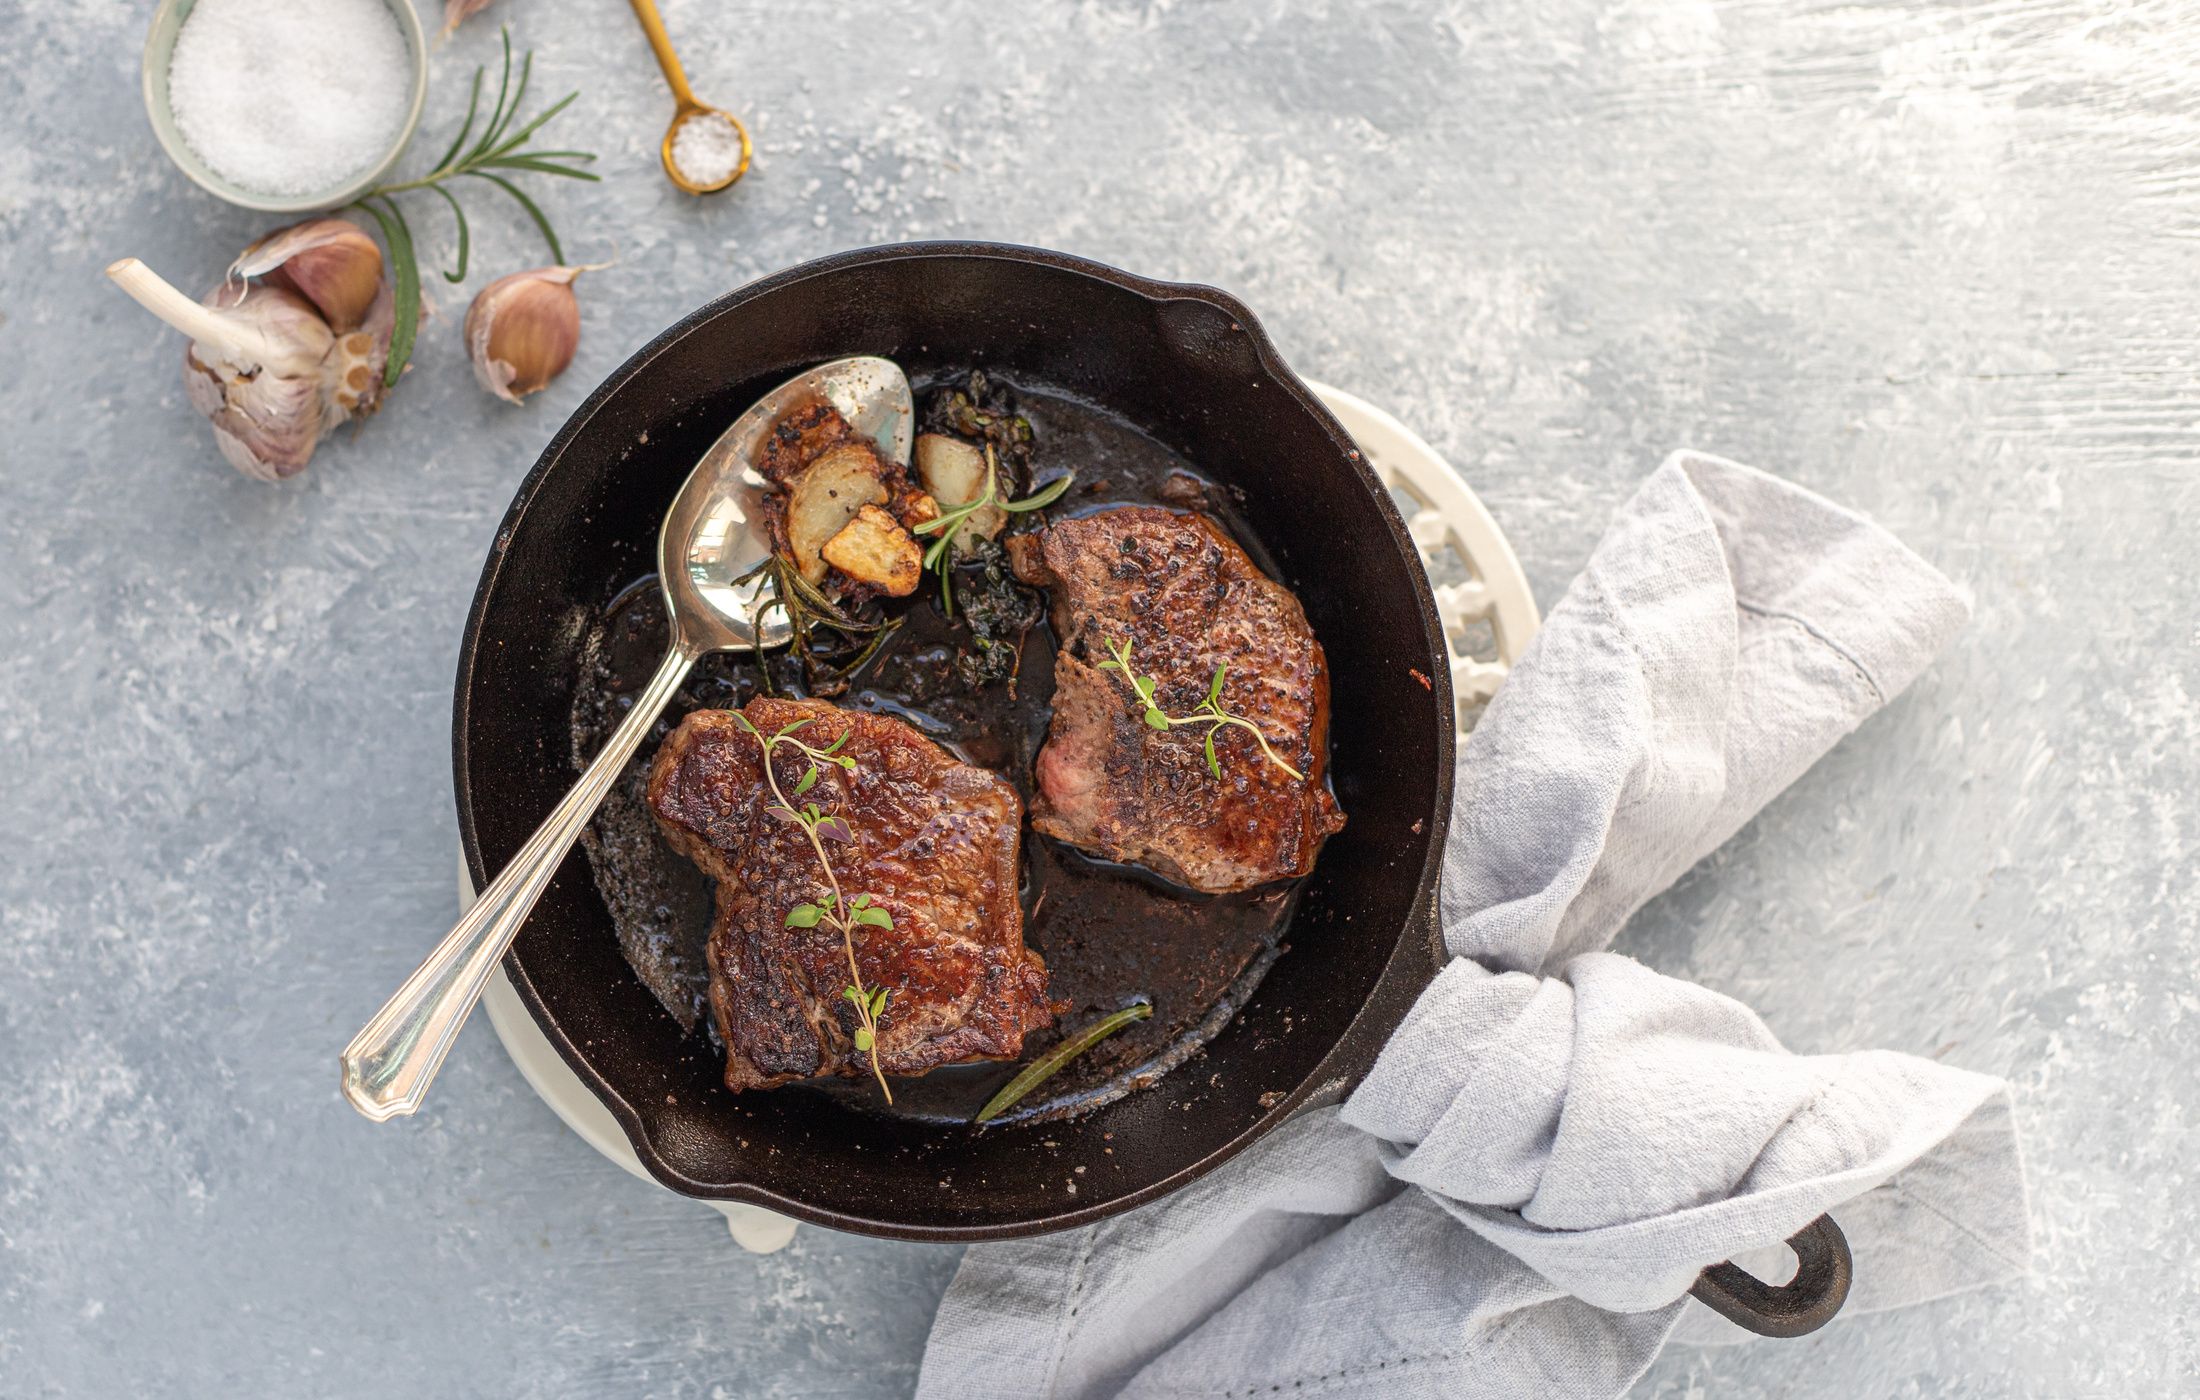 Seared Steak with Butter, Herbs and Garlic